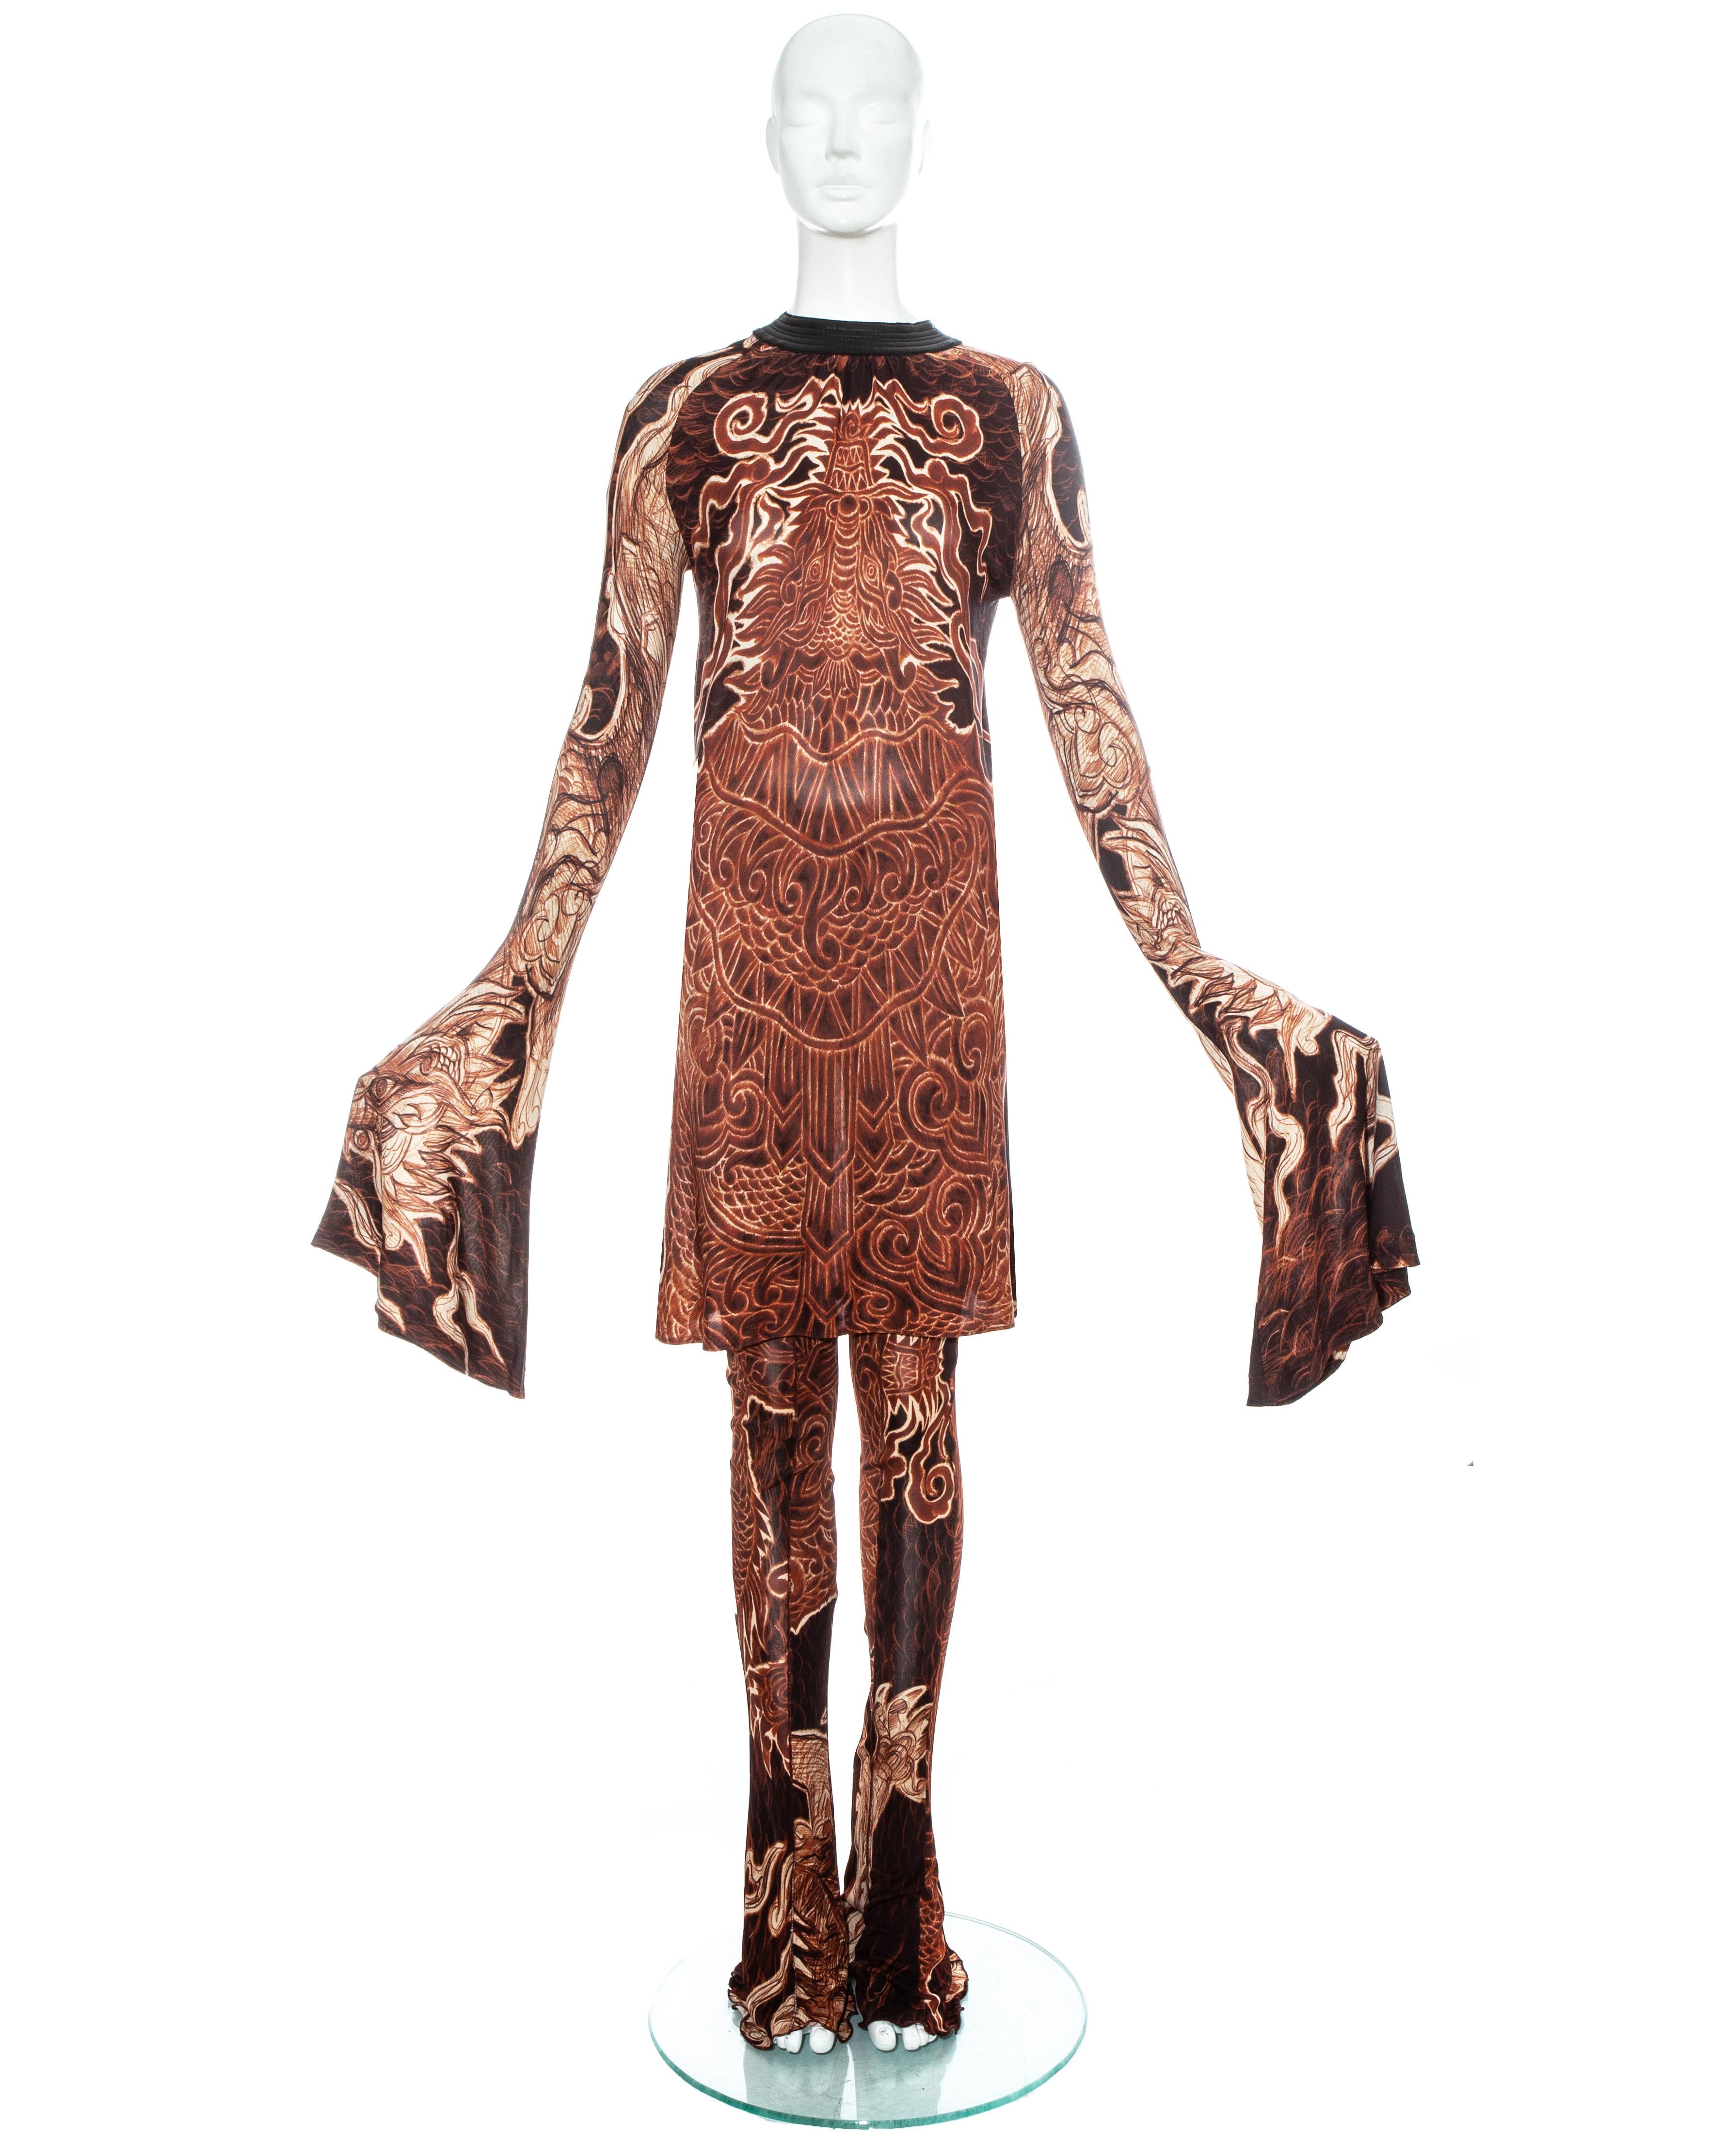 Jean Paul Gaultier printed jersey bell sleeve tunic with leather collar, sold with matching high waisted bell bottom pants

Fall-Winter 2008